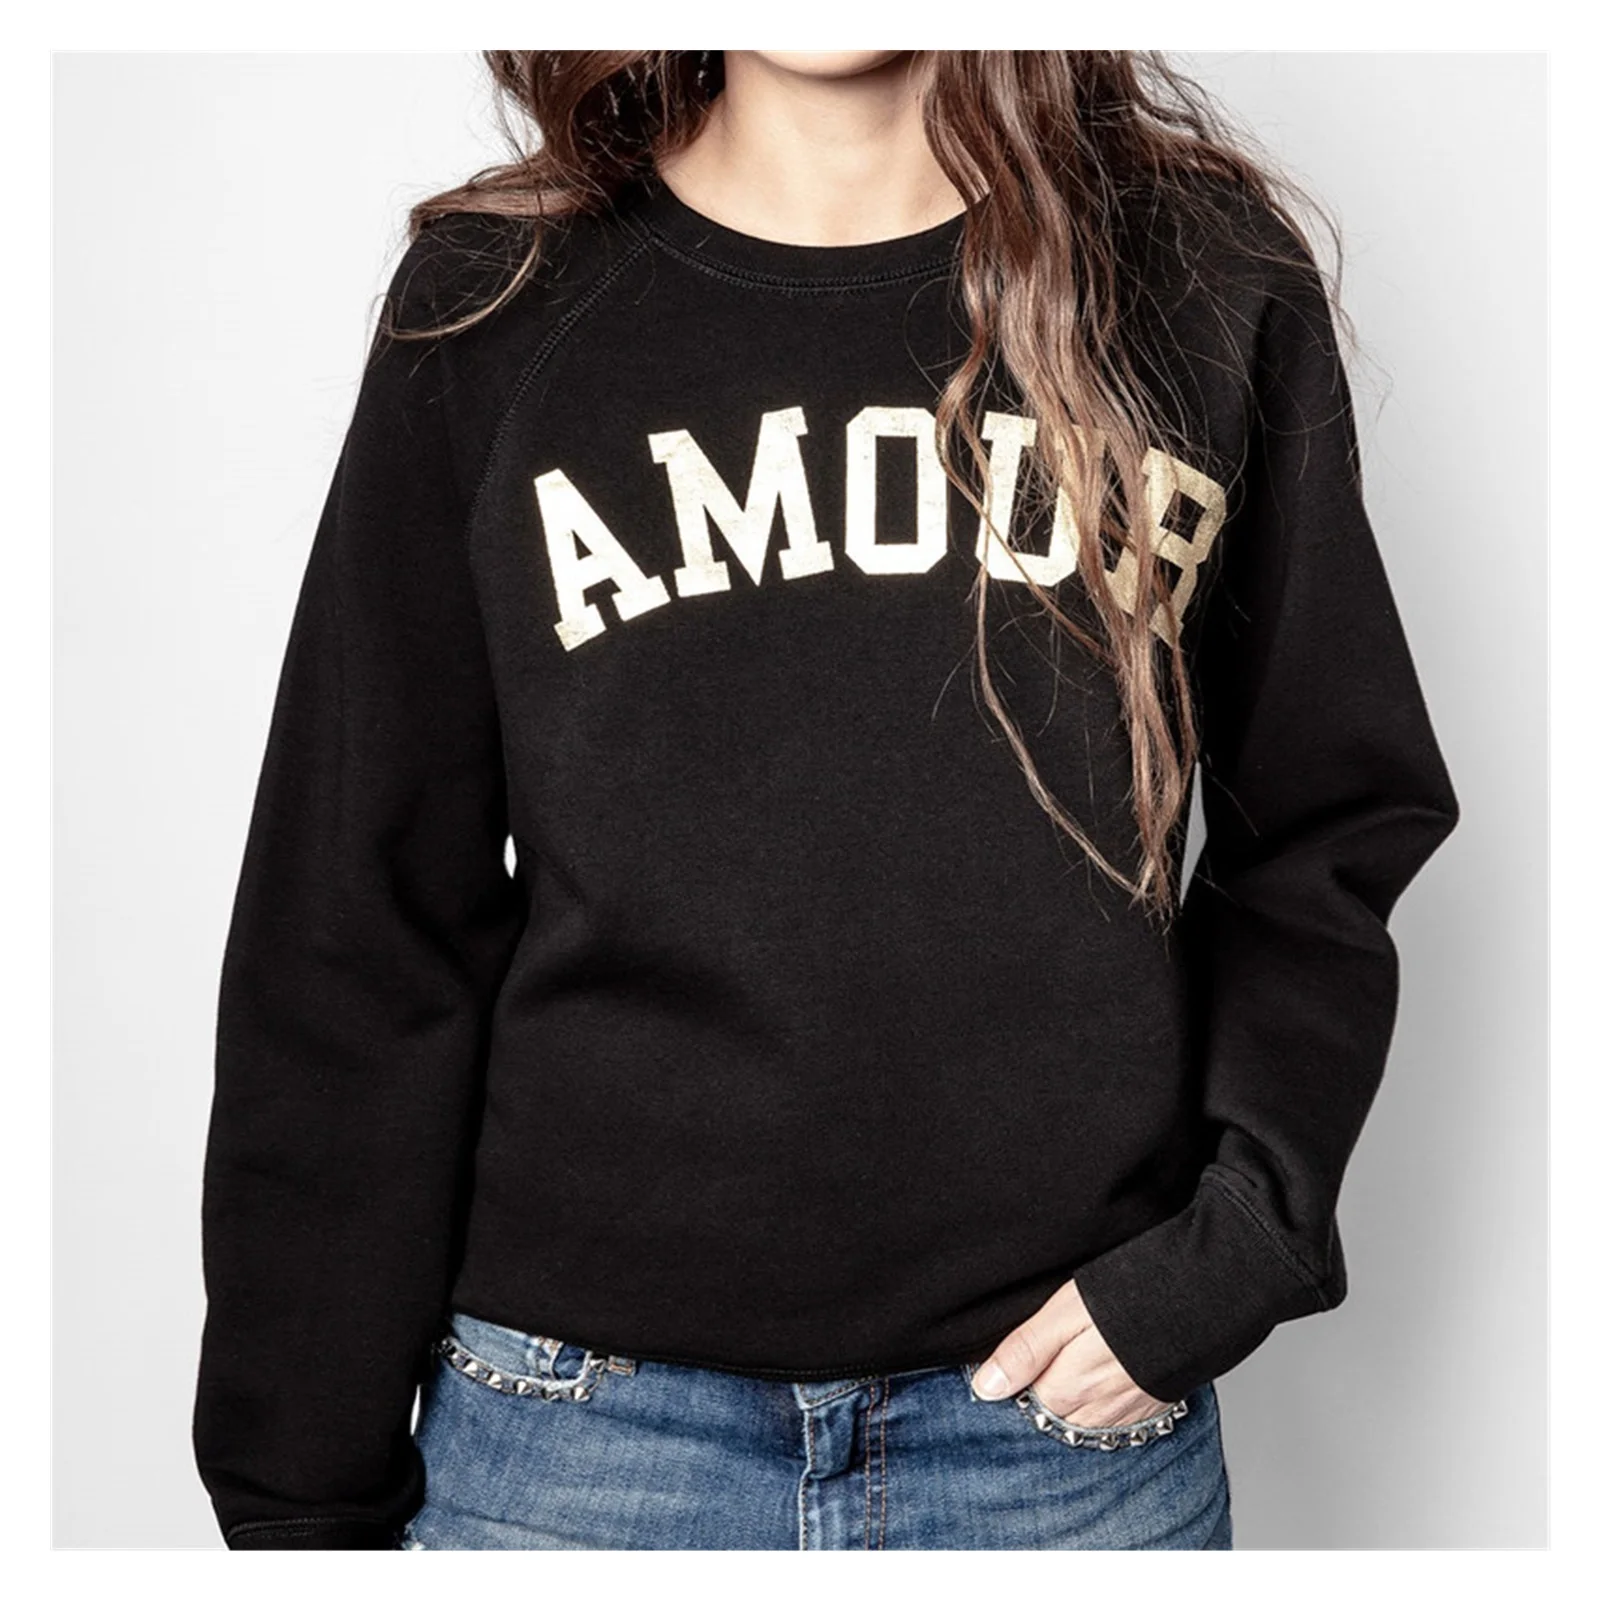 Women Black Sweatshirt Gold Letter Print 100% Cotton New 2022 Spring Autumn Long Sleeve Casual Sports Clothing